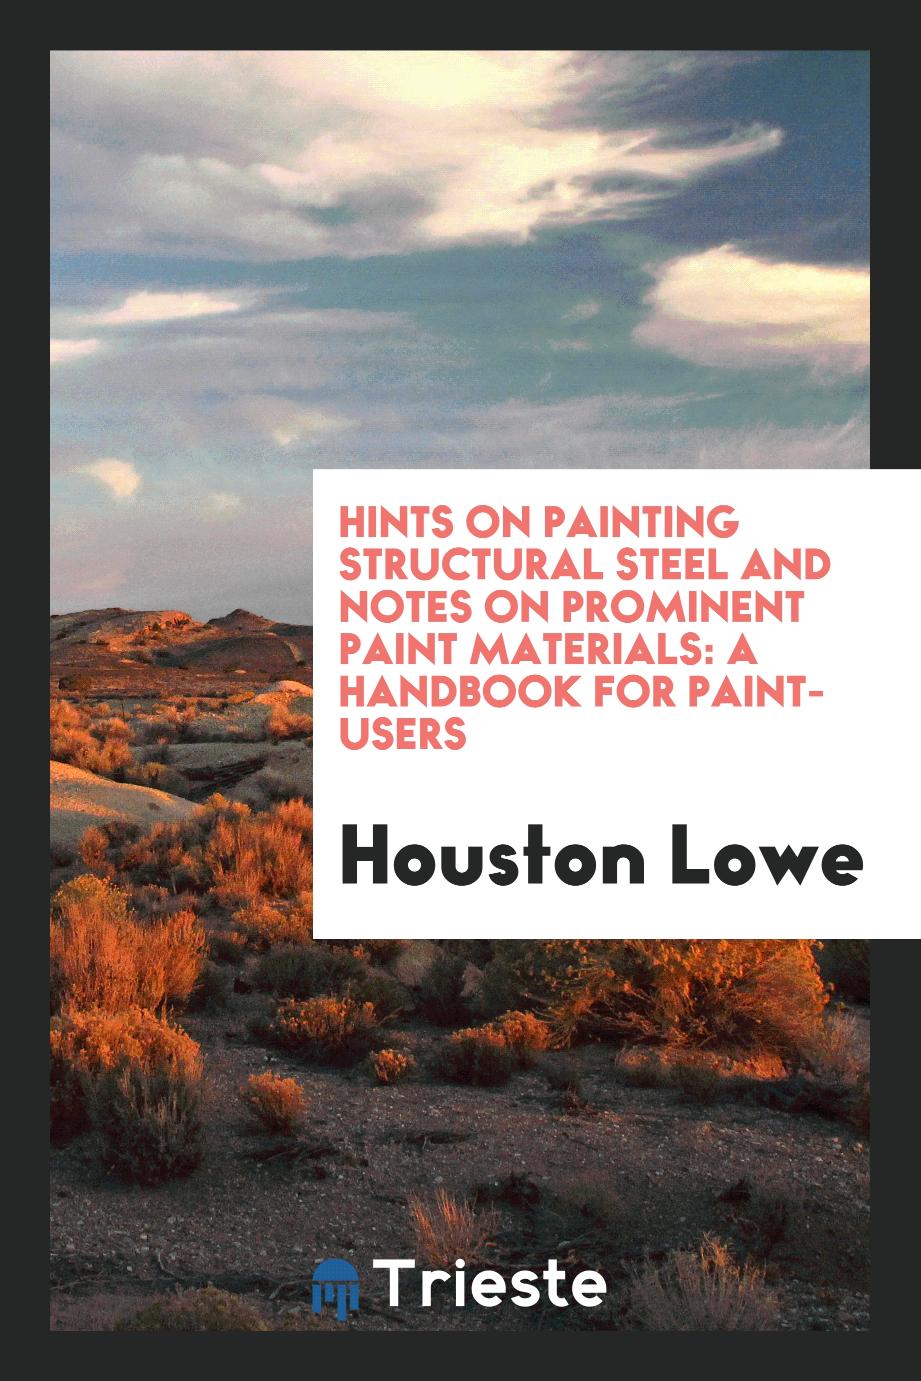 Hints on painting structural steel and notes on prominent paint materials: a handbook for paint-users